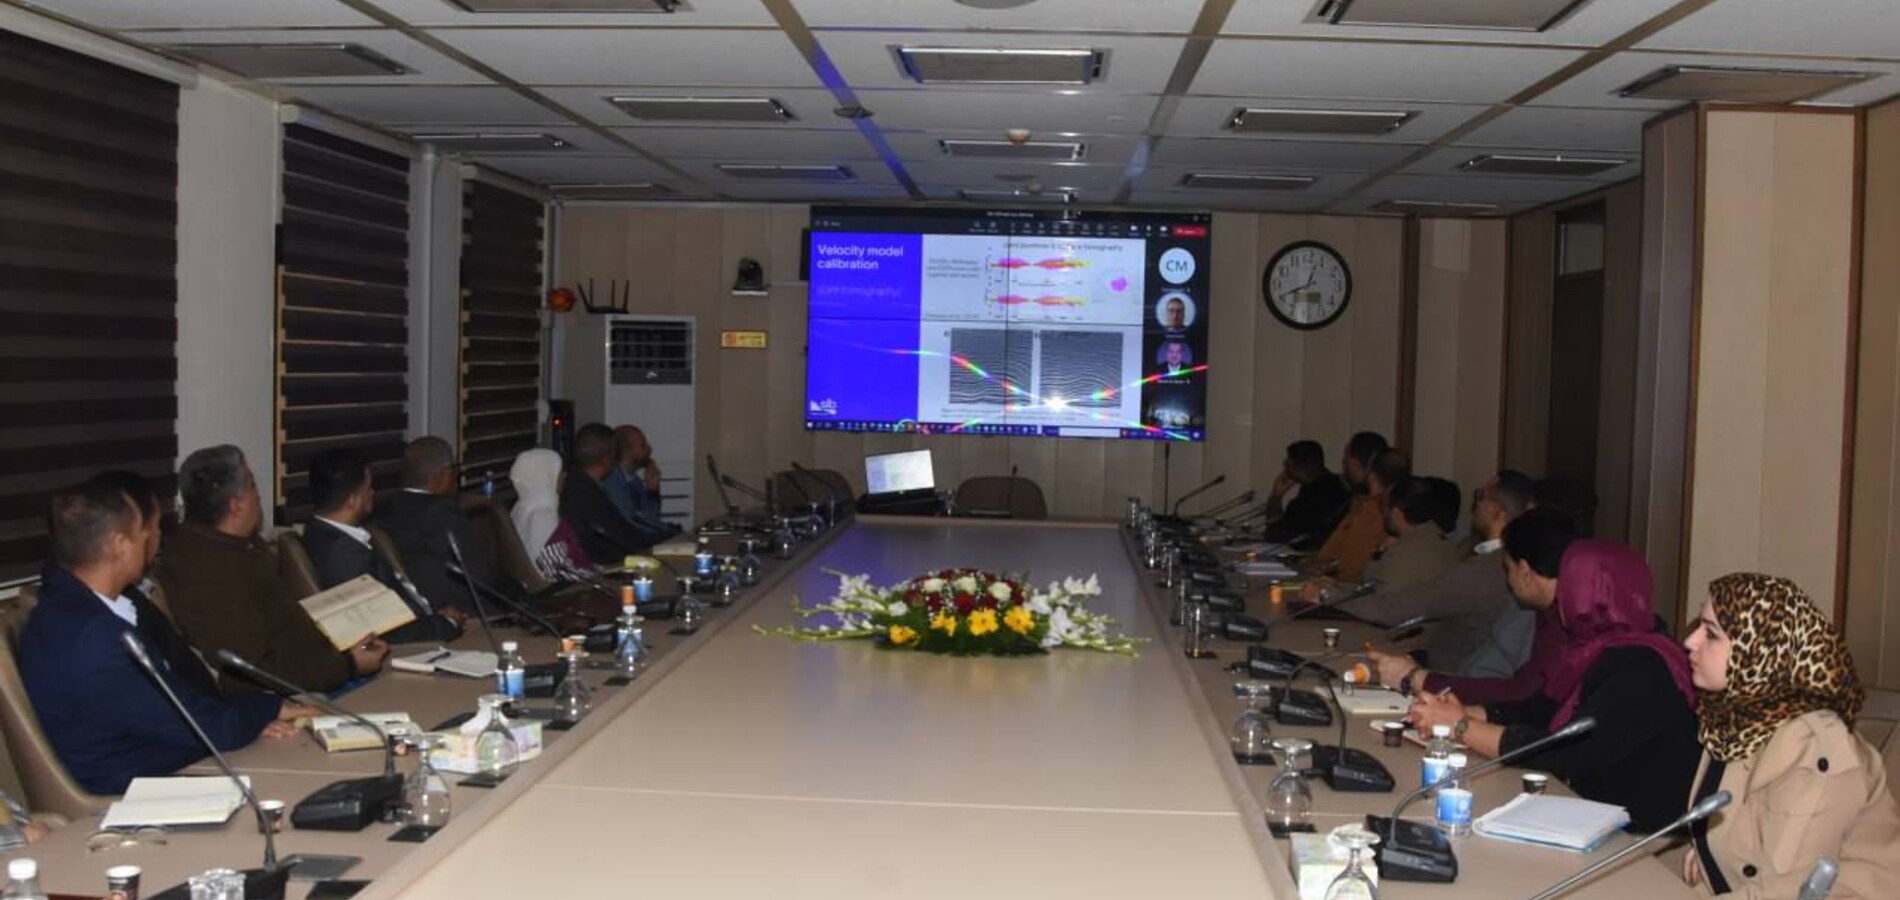 The OEC is Holding a Workshop to Develop the Seismic Survey Method